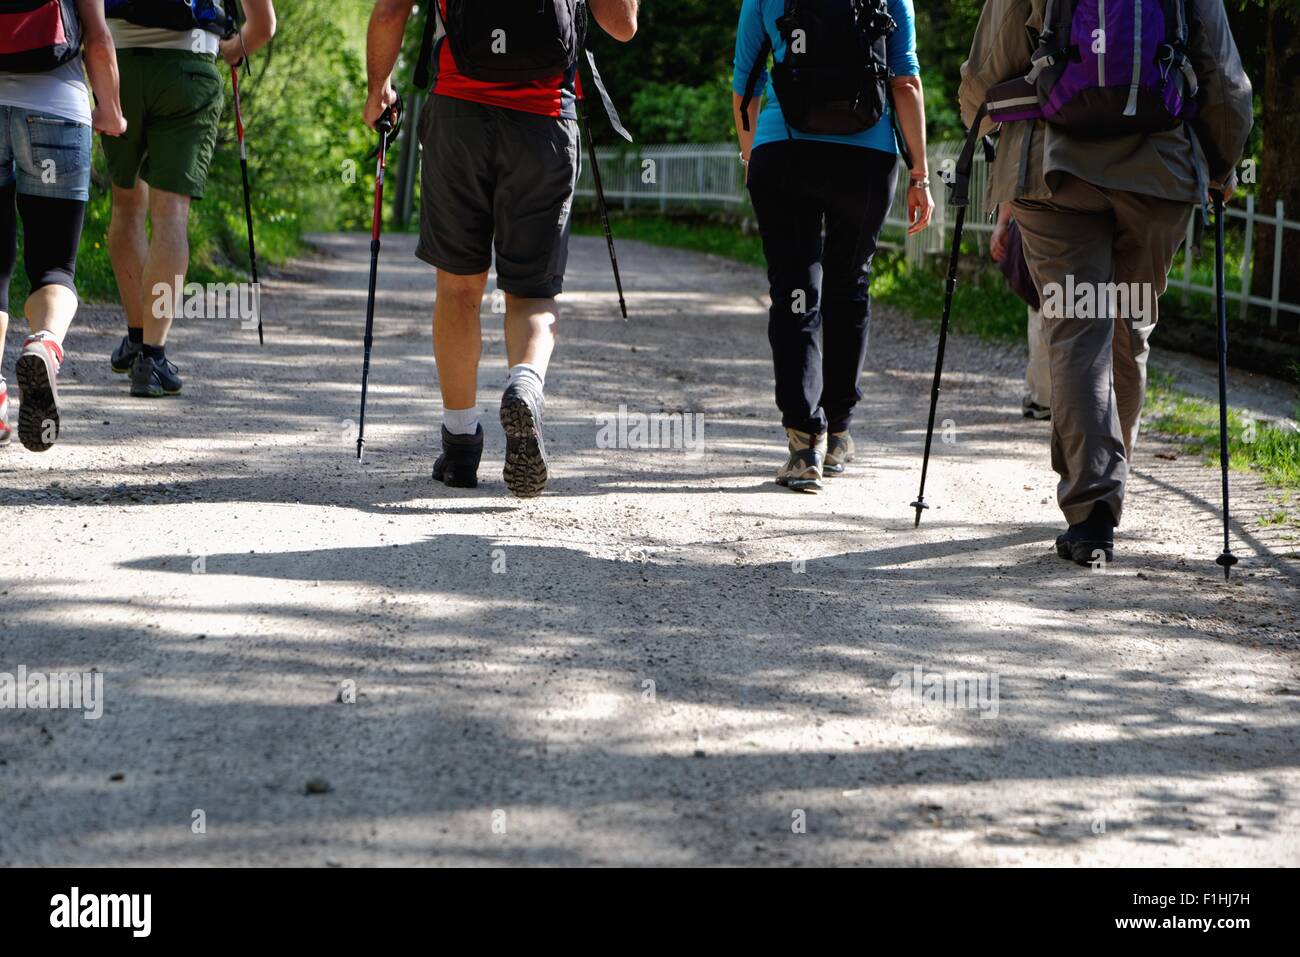 Rear waist down view of mature hikers on rural road, Grigna, Lecco, Lombardy, Italy Stock Photo